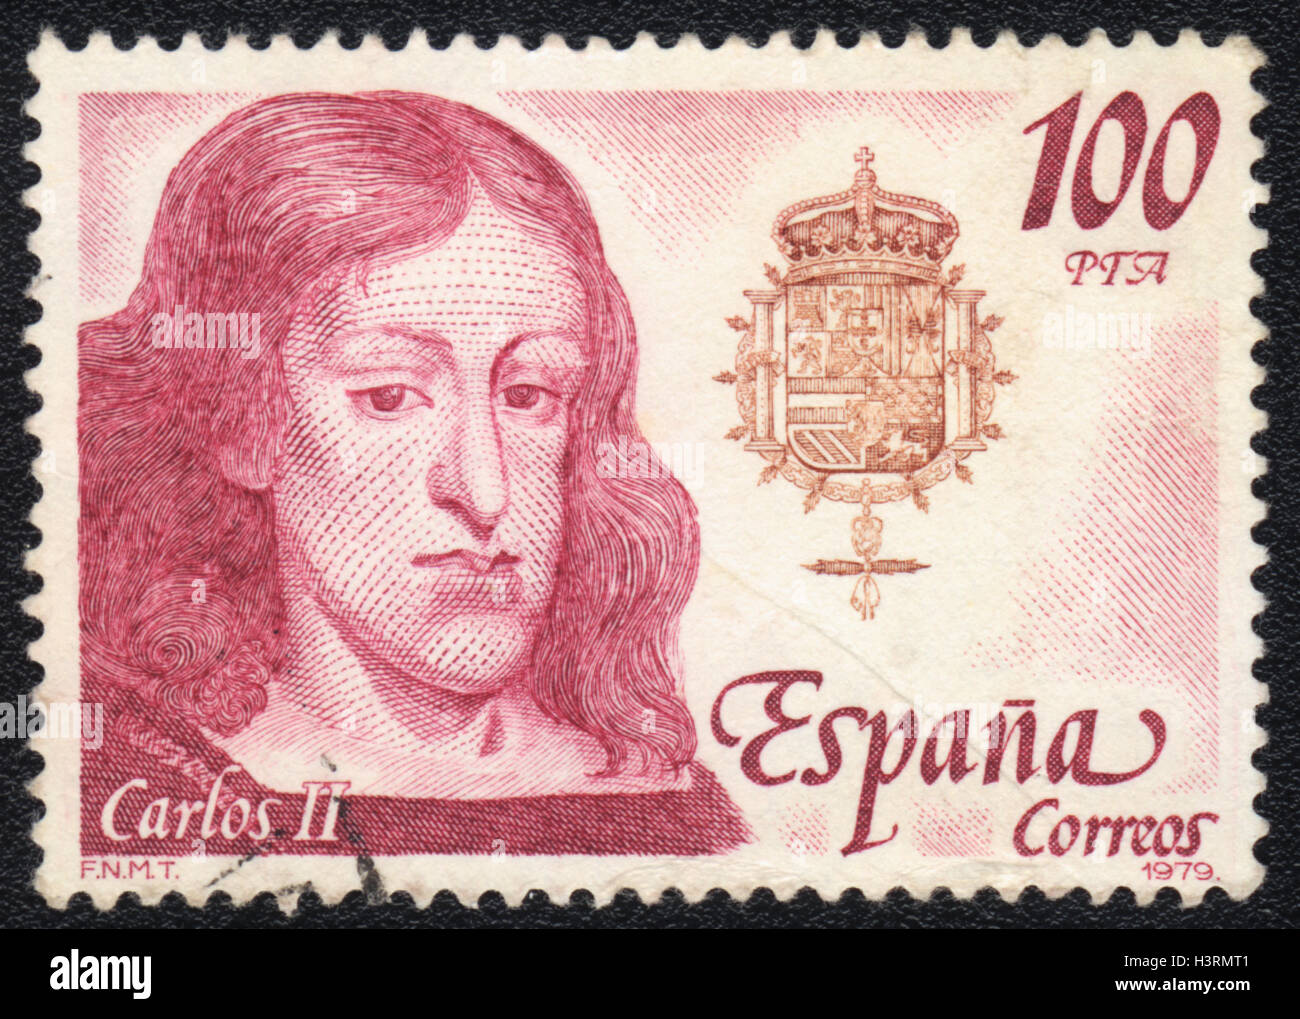 A postage stamp printed in Spain, shows Portrait of Carlos II of Spain, 1979 Stock Photo